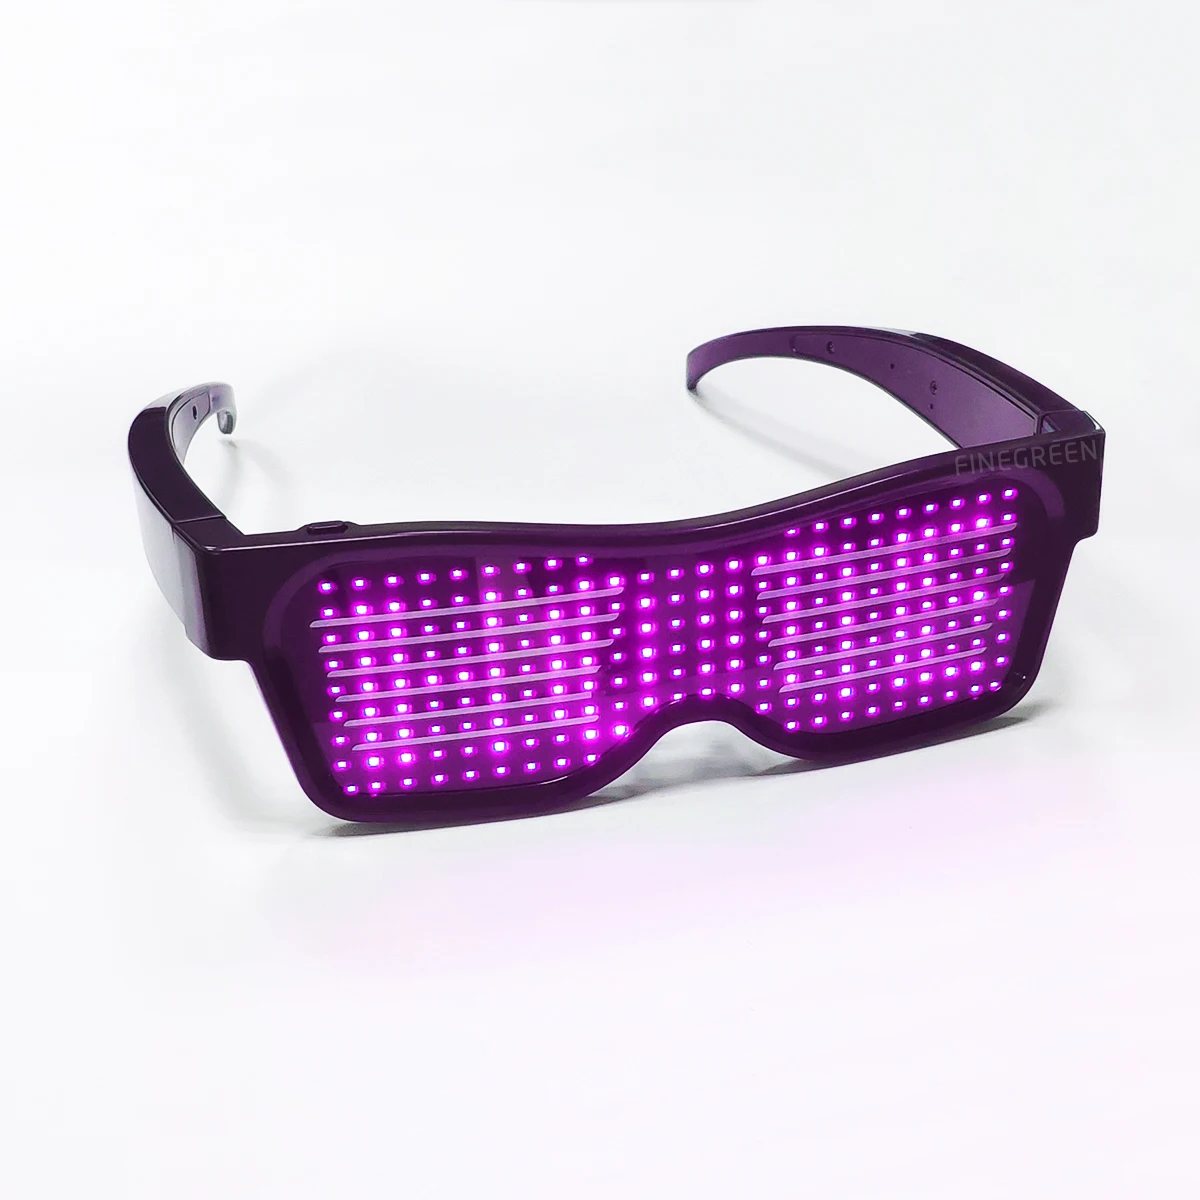 
Bluetooth connects to APP-controlled LED glasses in a variety of colors, optional free-changing mode available for Halloween 